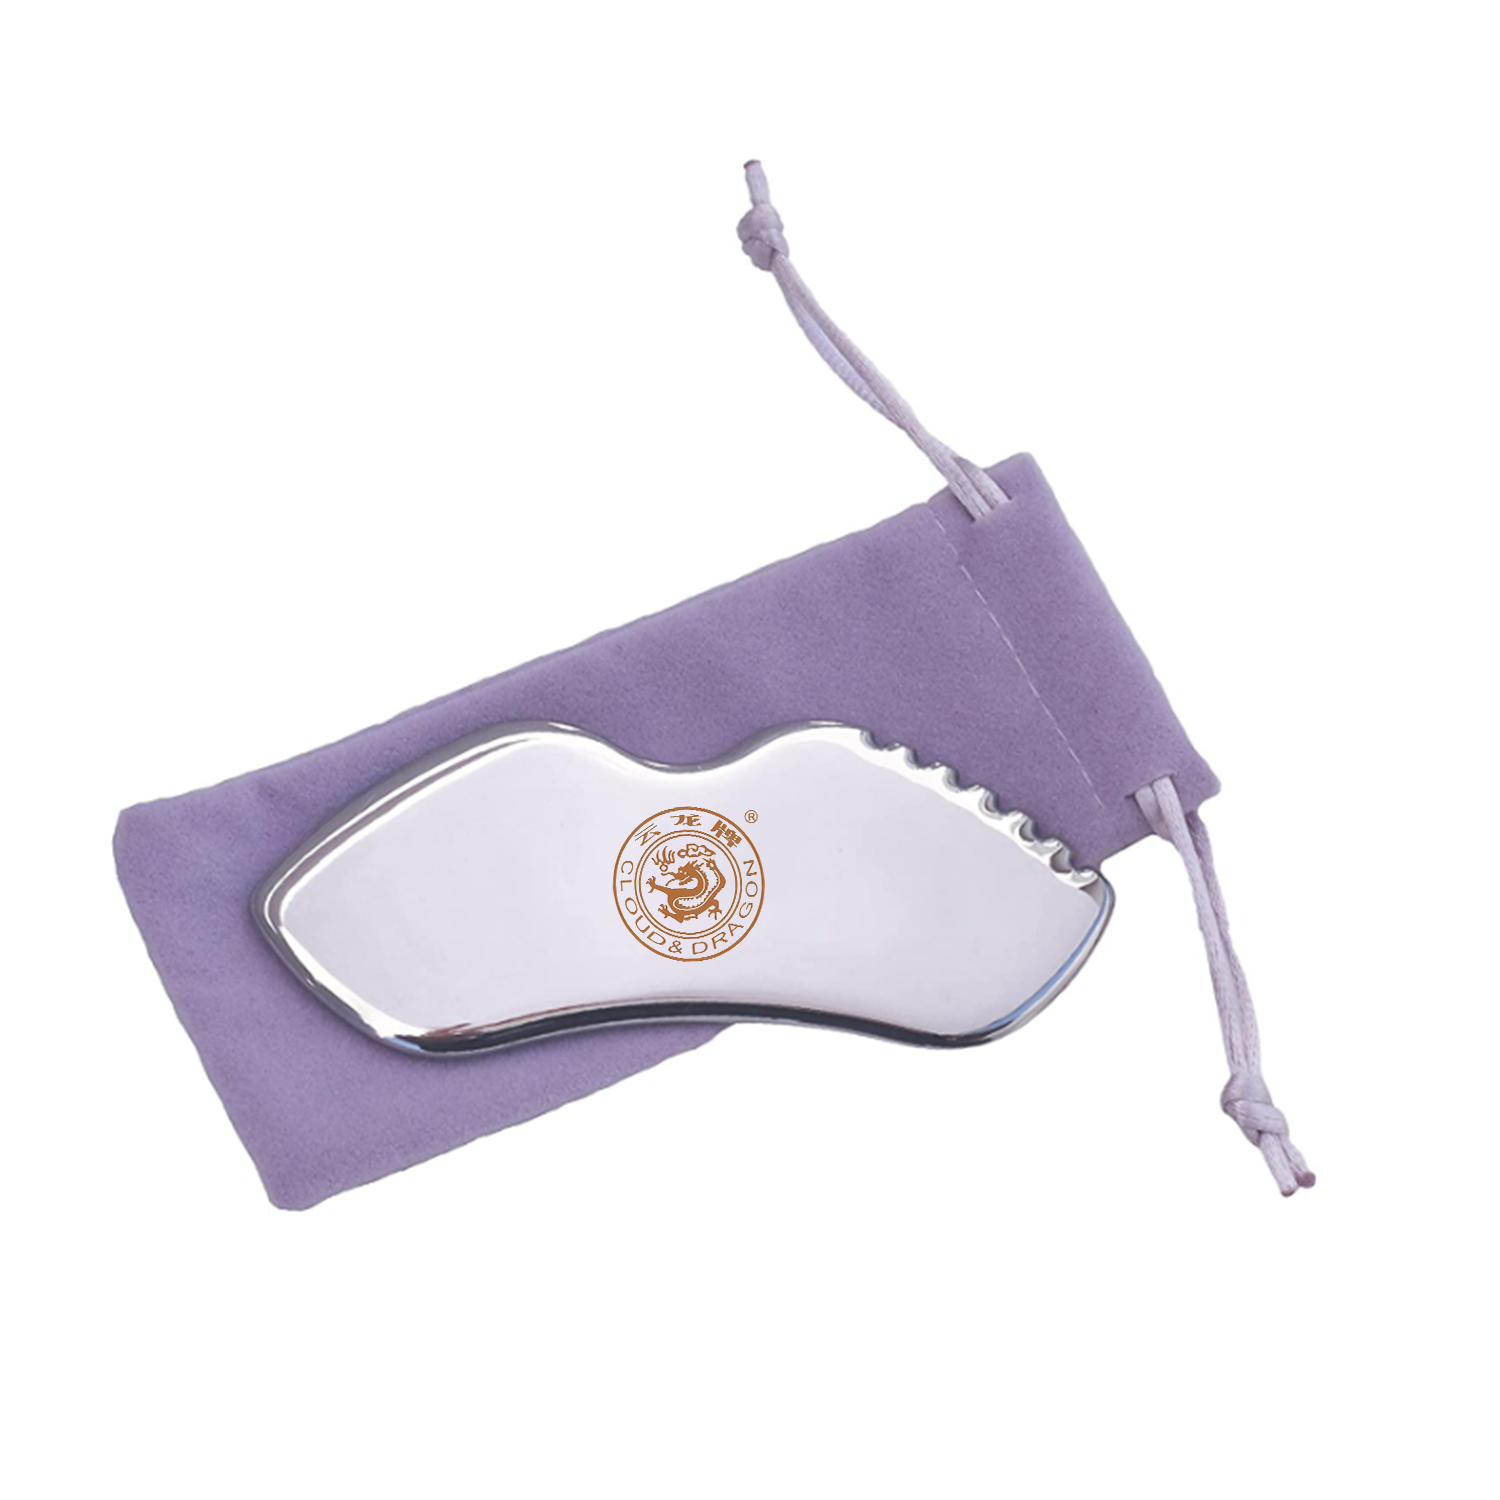 Iastm Stainless Steel Guasha Massage Therapy Tools 